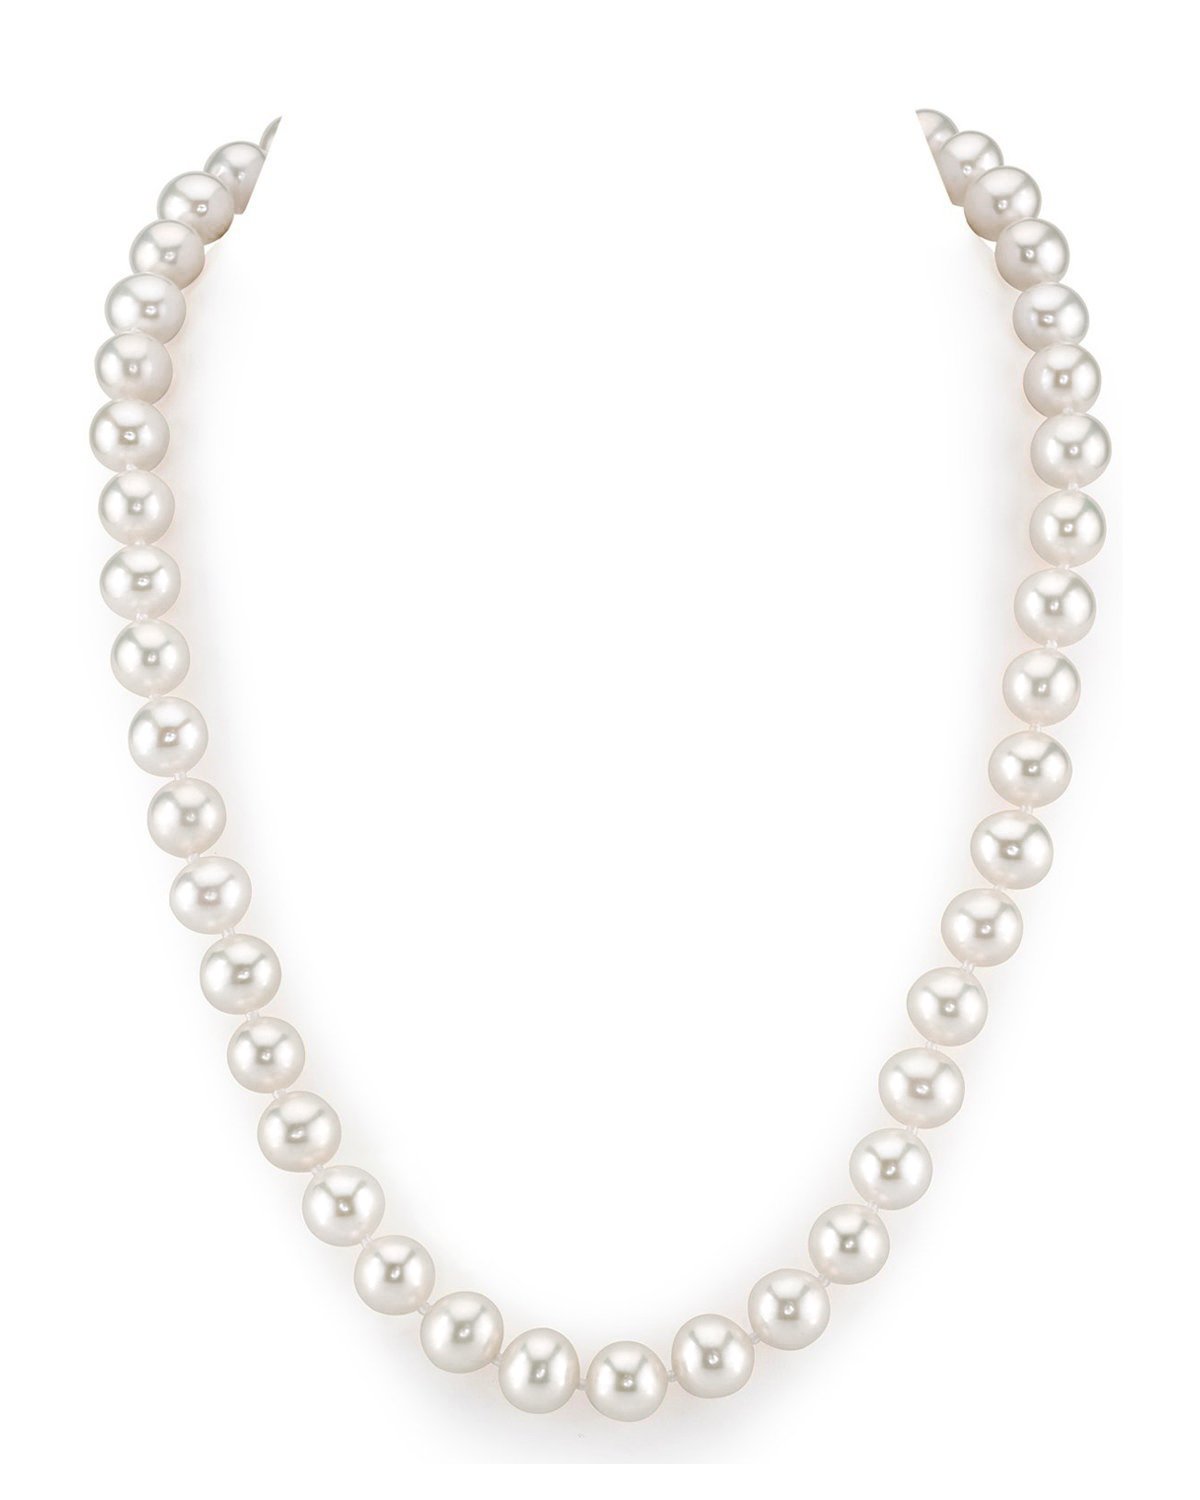 8.5-9.5mm White Freshwater Pearl Necklace - AAA Quality